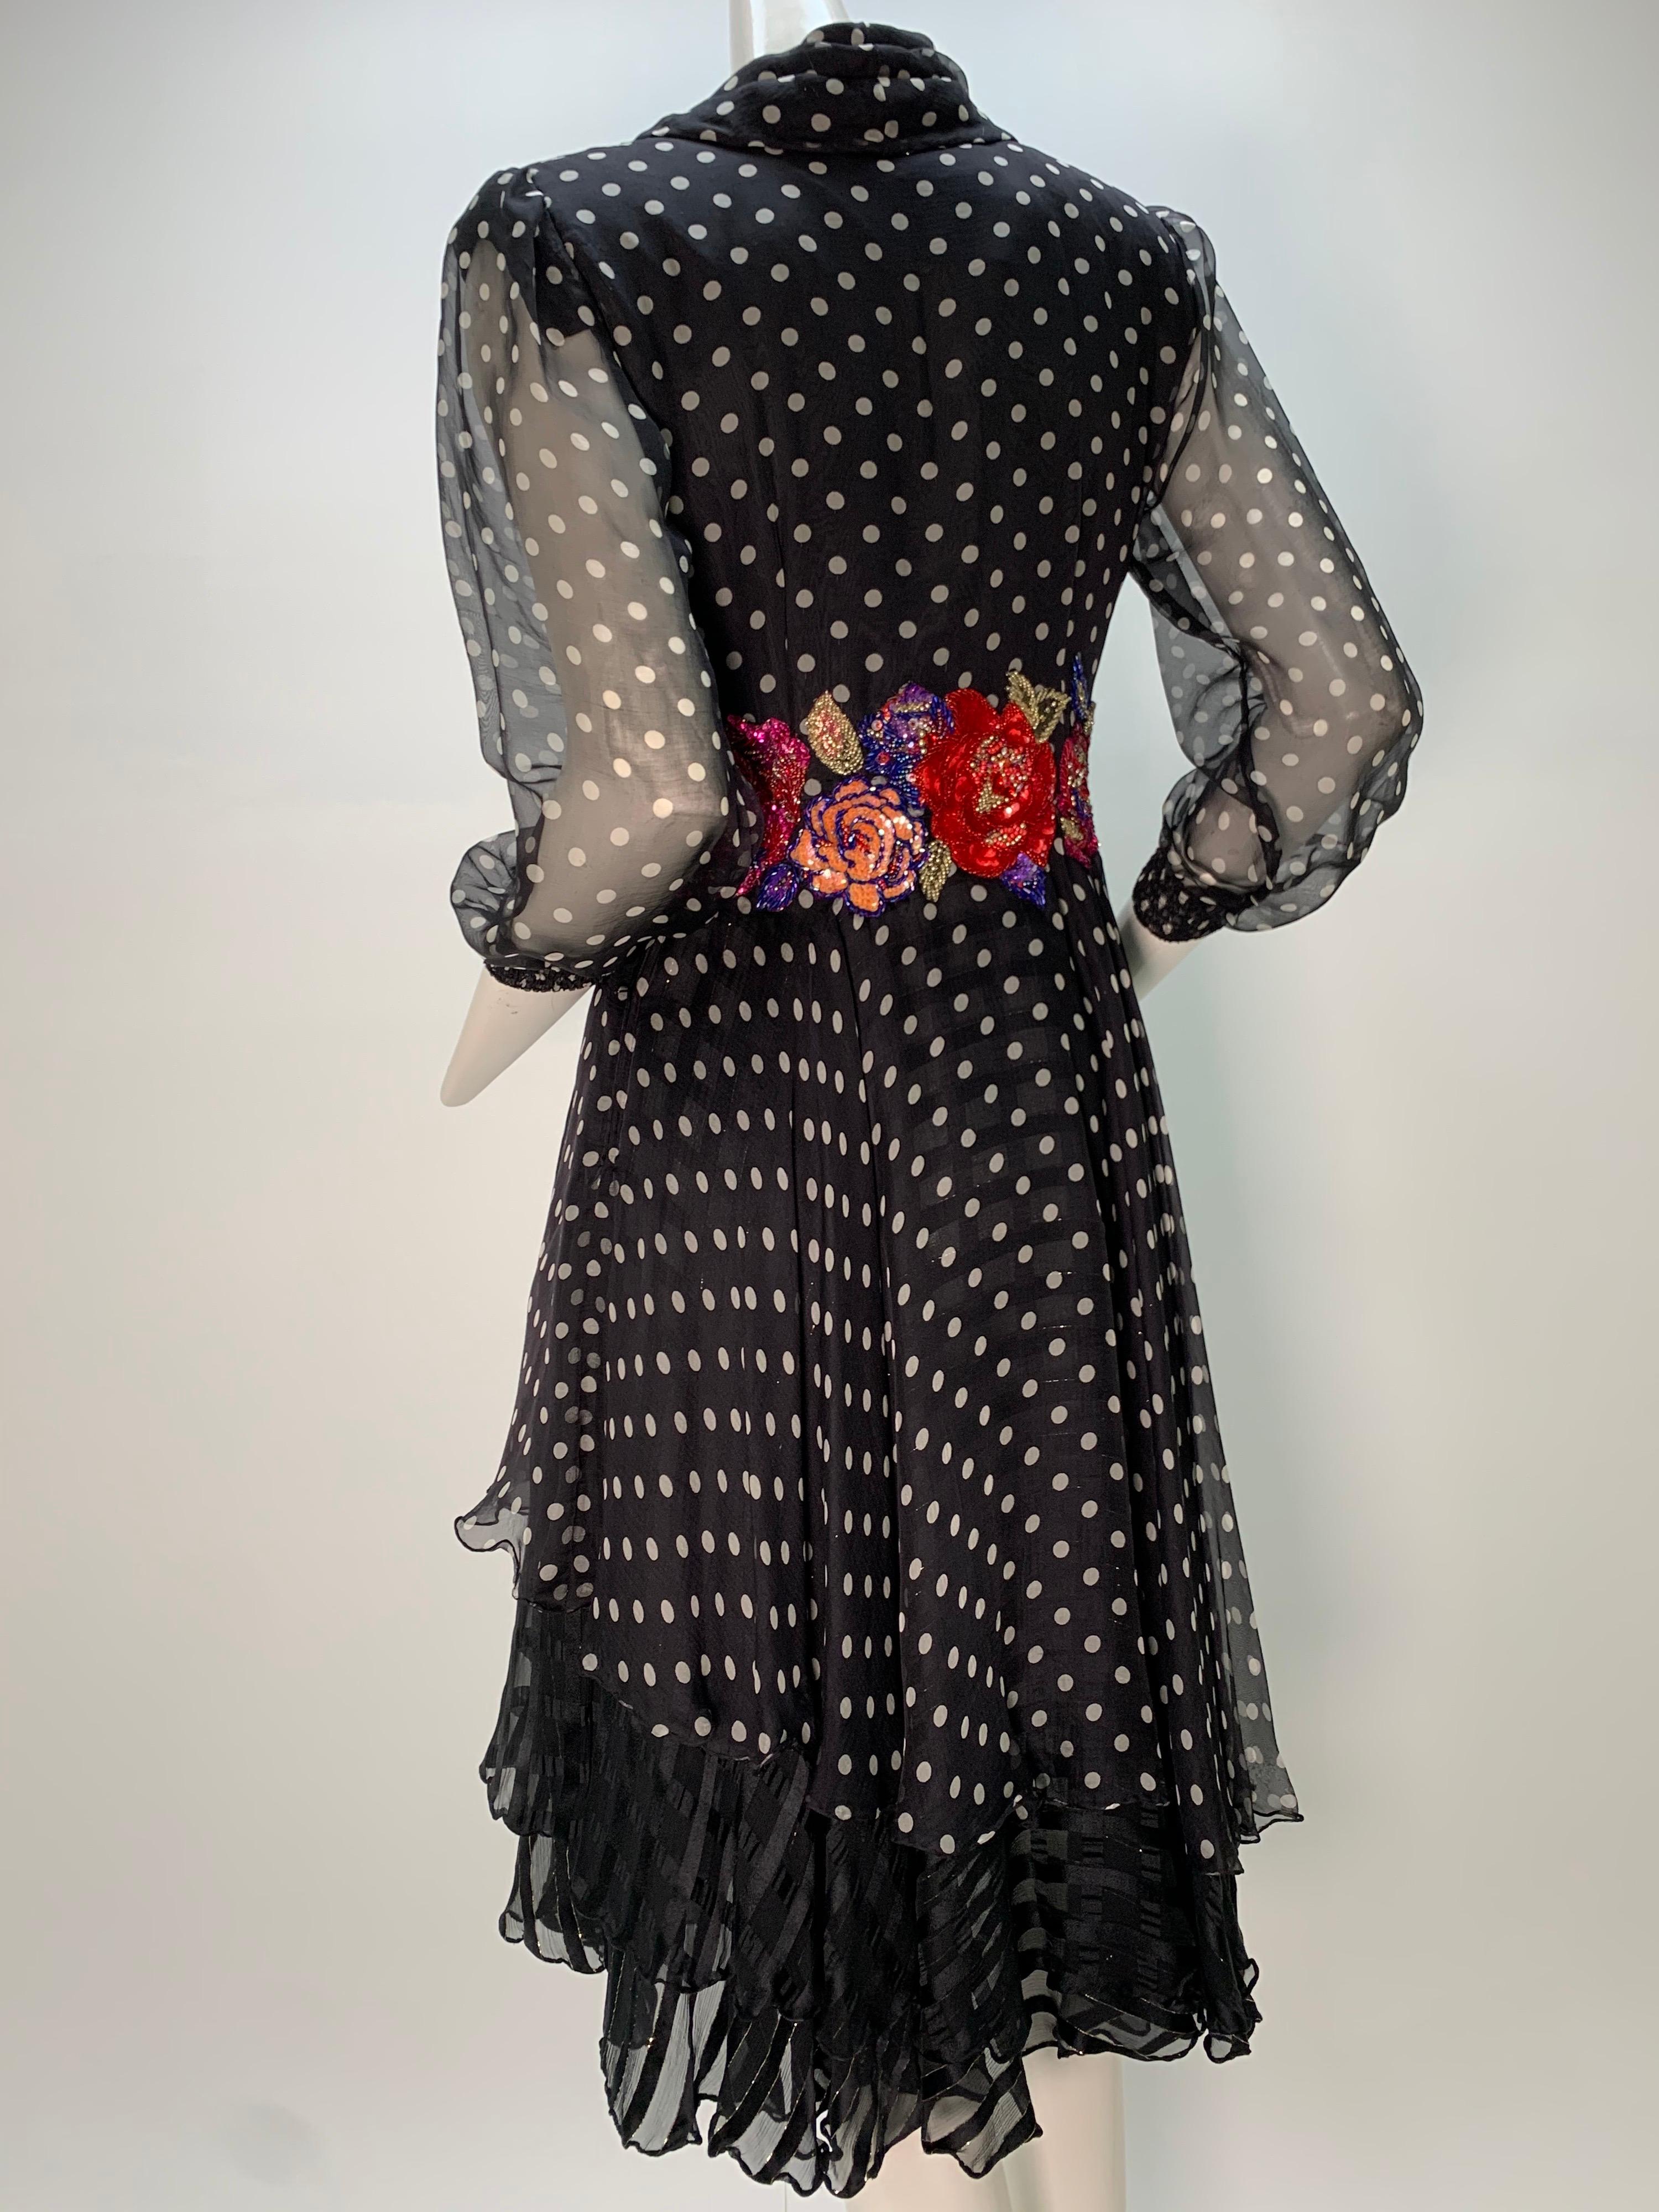 1980 Whimsical Silk Chiffon Polka Dot Dress W/ Colorful Beaded & Sequin Florals  5